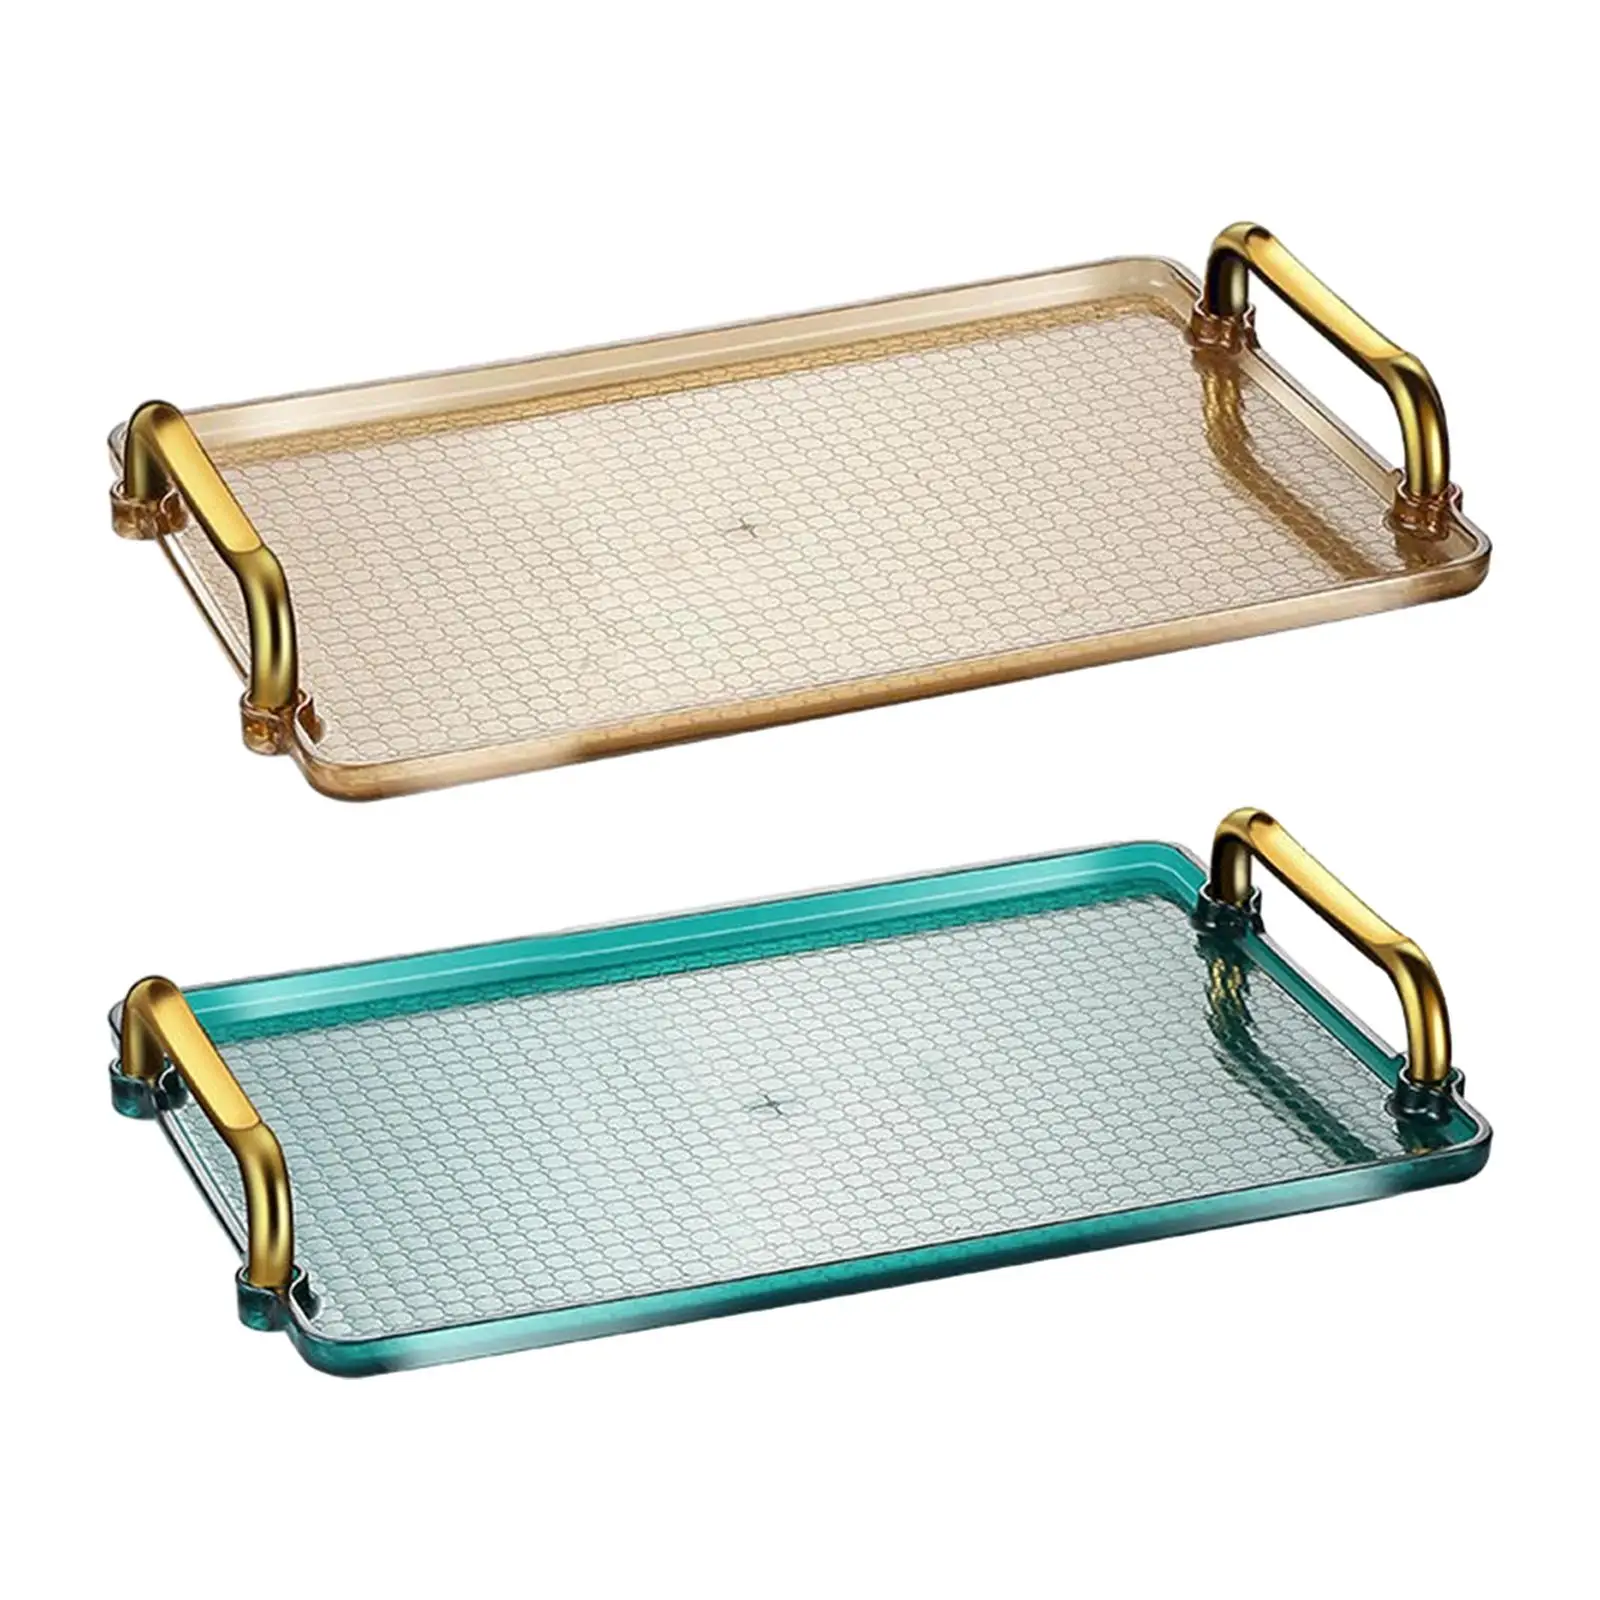 Serving Tray Platter Multipurpose Durable for Homes, Hotels, Bars Serving Pastries, Snacks, Coffee, Tea Ottoman Tray Rectangular